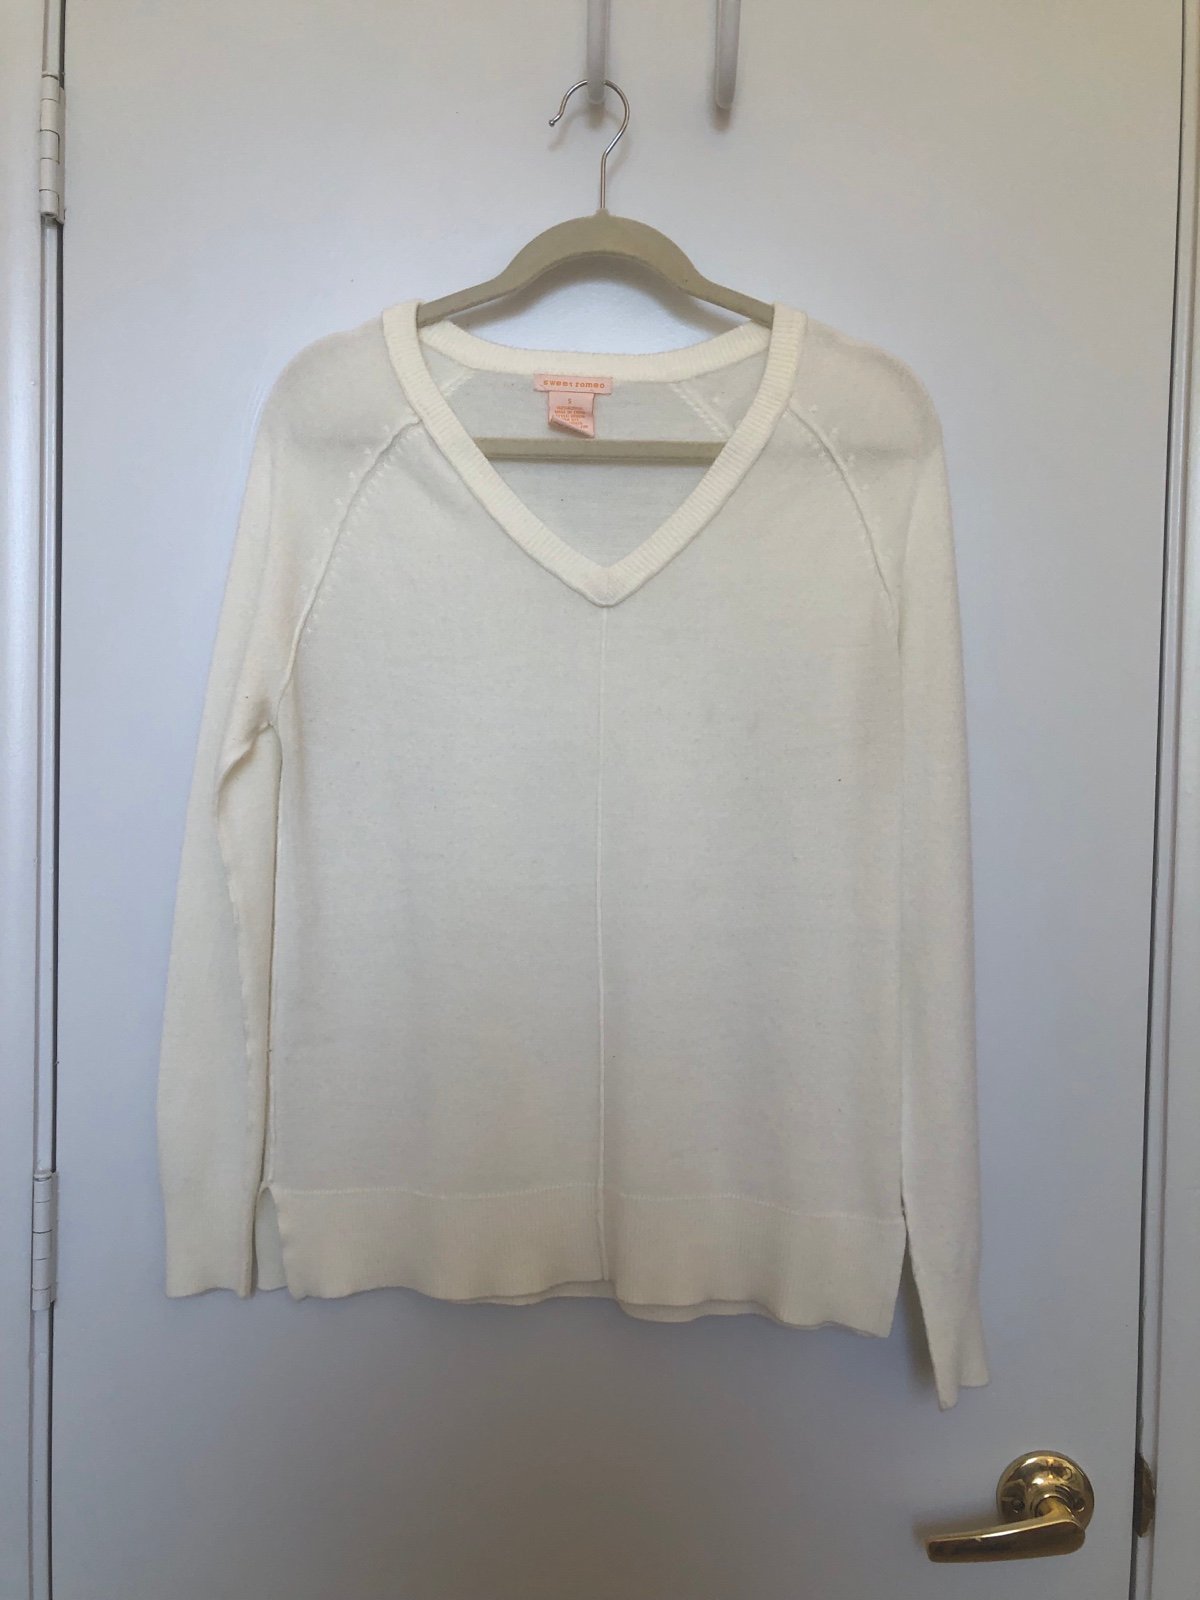 Authentic Lightweight White Sweater ItymGqeNx Counter Genuine 